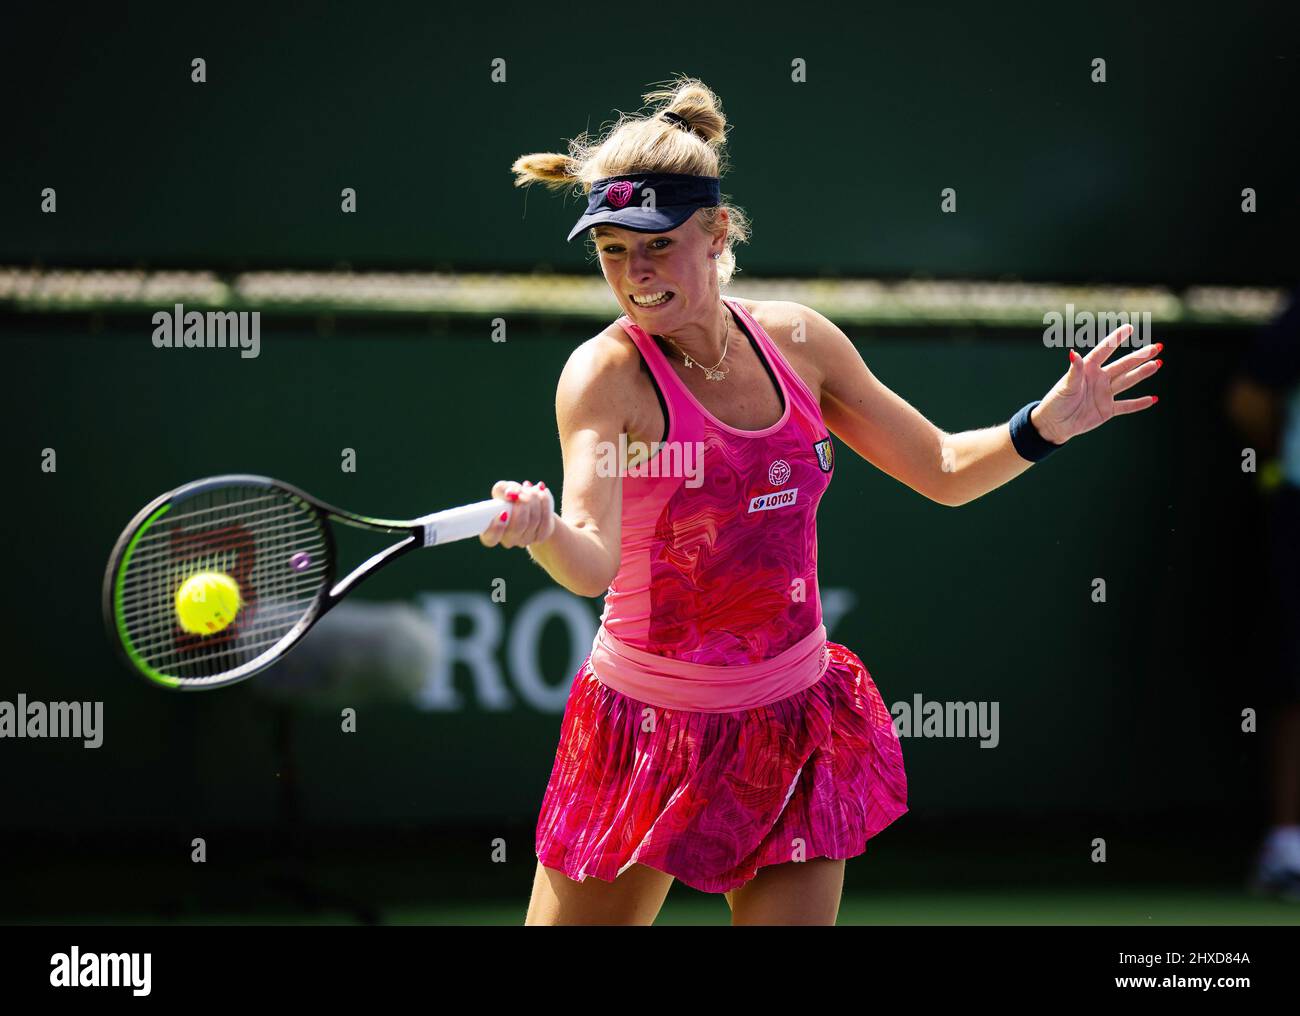 Magdalena Frech of Poland in action against Mayar Sherif of Egypt during the first round of the 2022 BNP Paribas Open, WTA 1000 tennis tournament on March 10, 2022 at Indian Wells